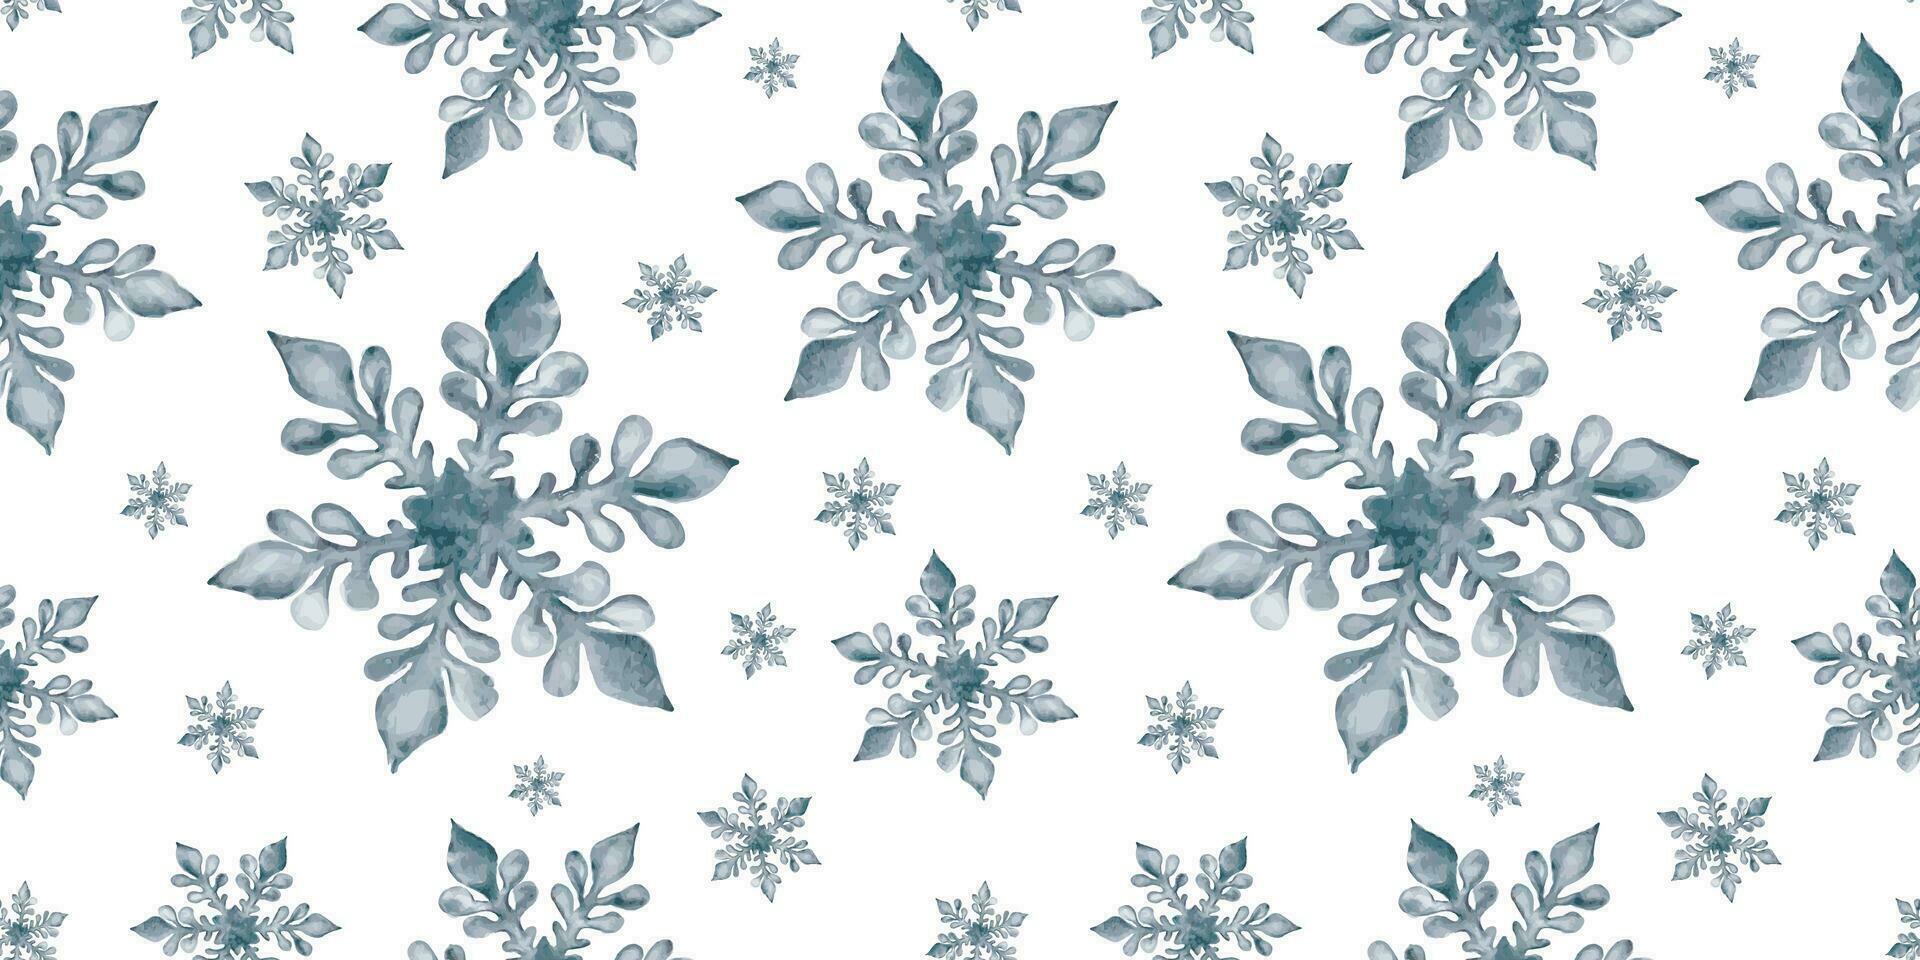 Watercolor hand drawn seamless pattern with blue, teal and rose colored snowflakes. Christmas New Year snow design for holiday greeting cards, print, textile, sale, web, design and wrapping paper. vector